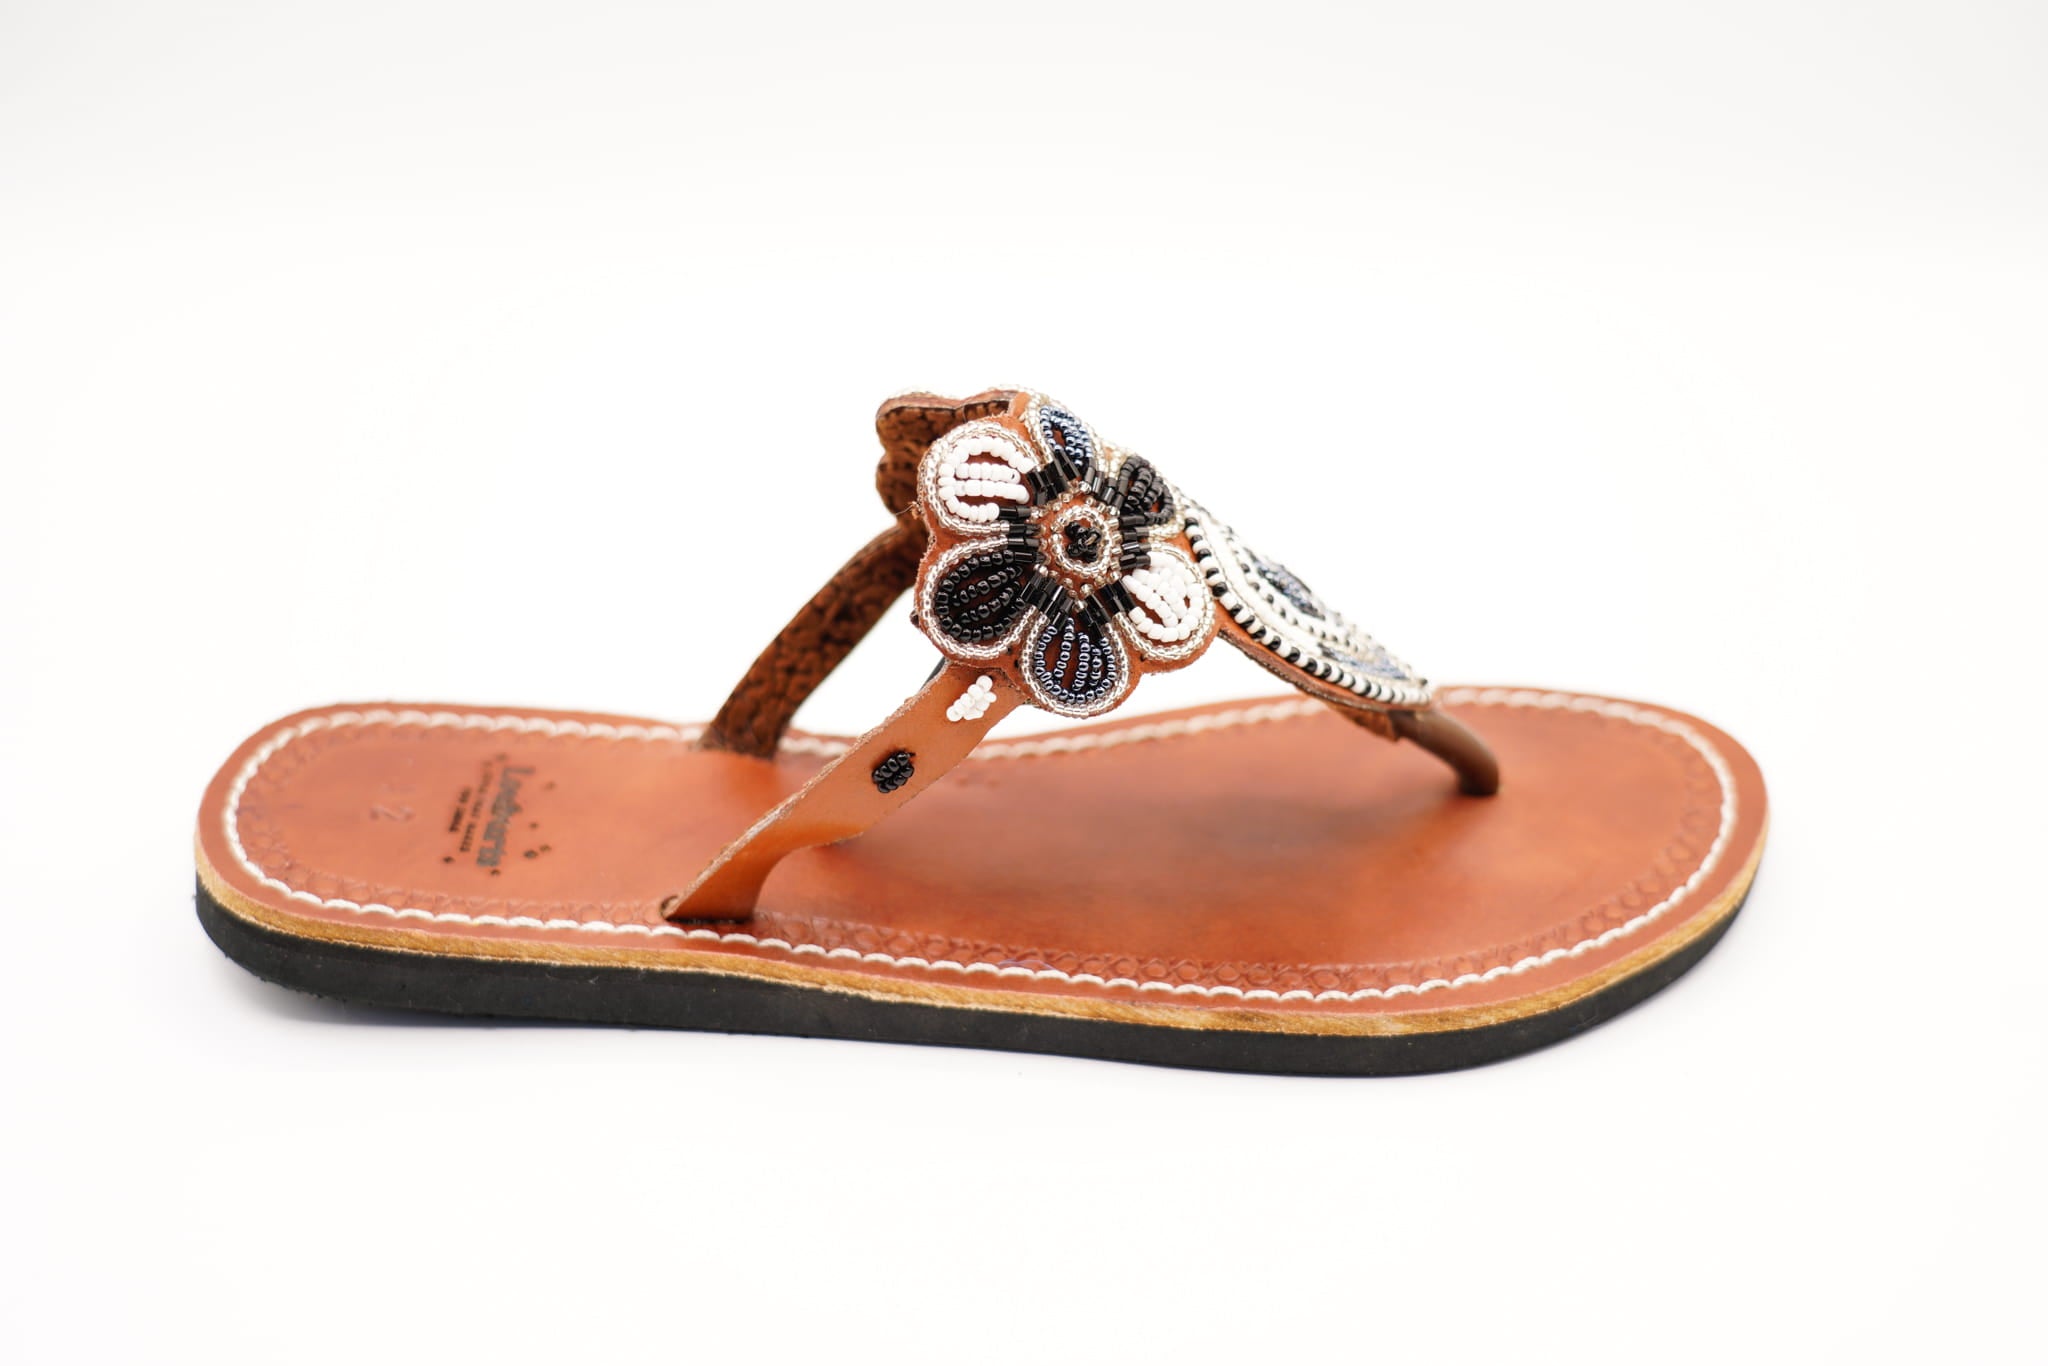 white and black leather sandals profile